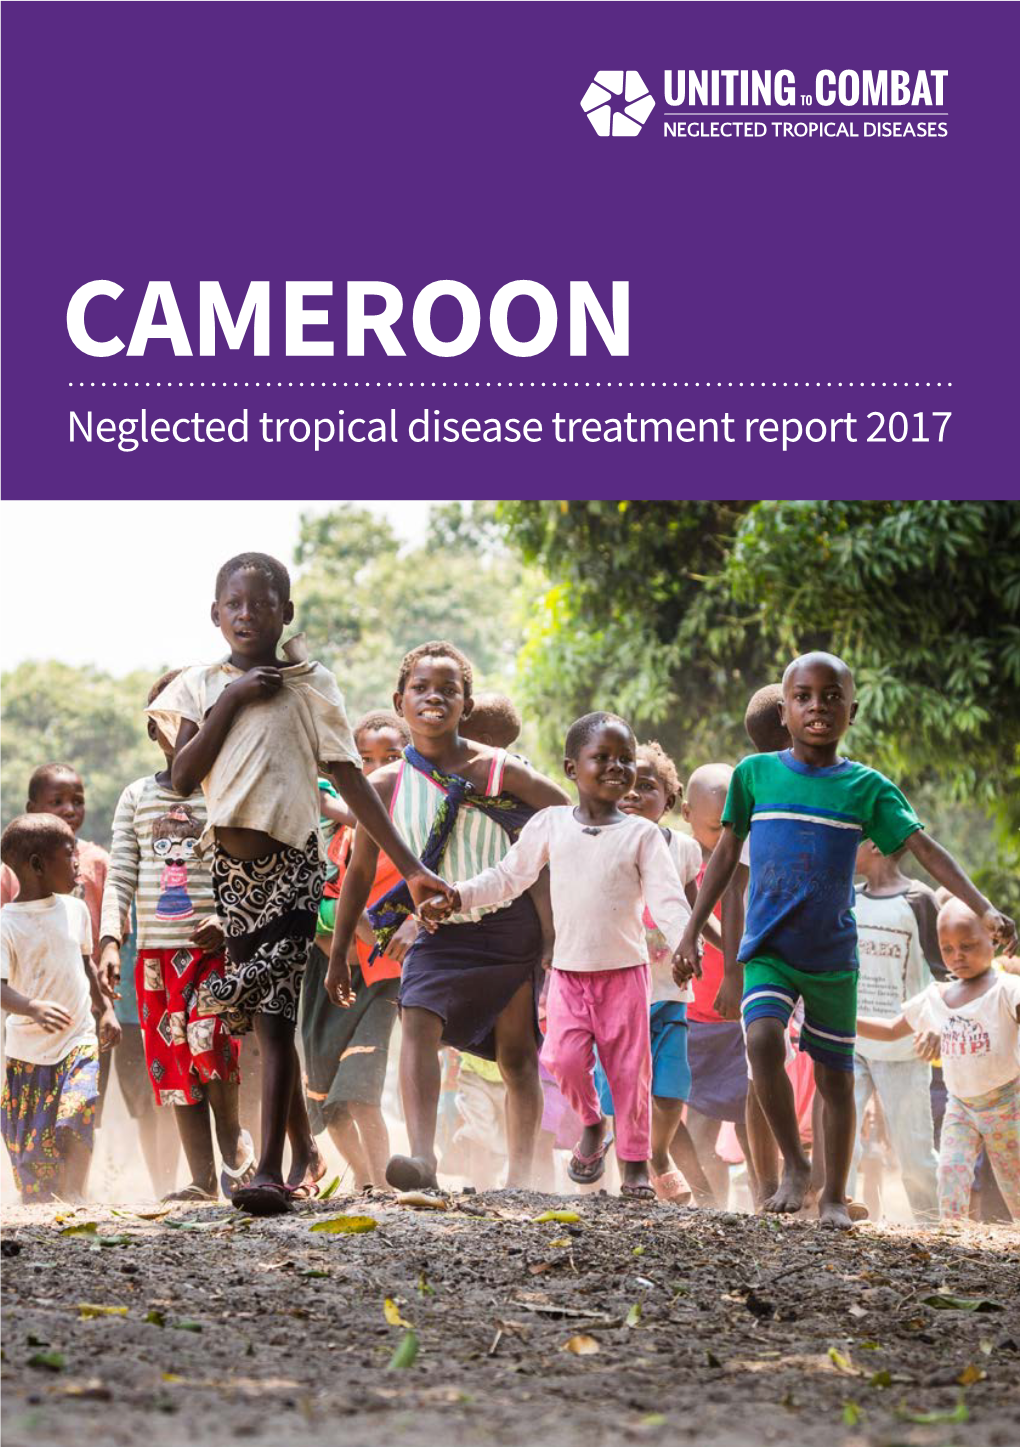 CAMEROON Neglected Tropical Disease Treatment Report 2017